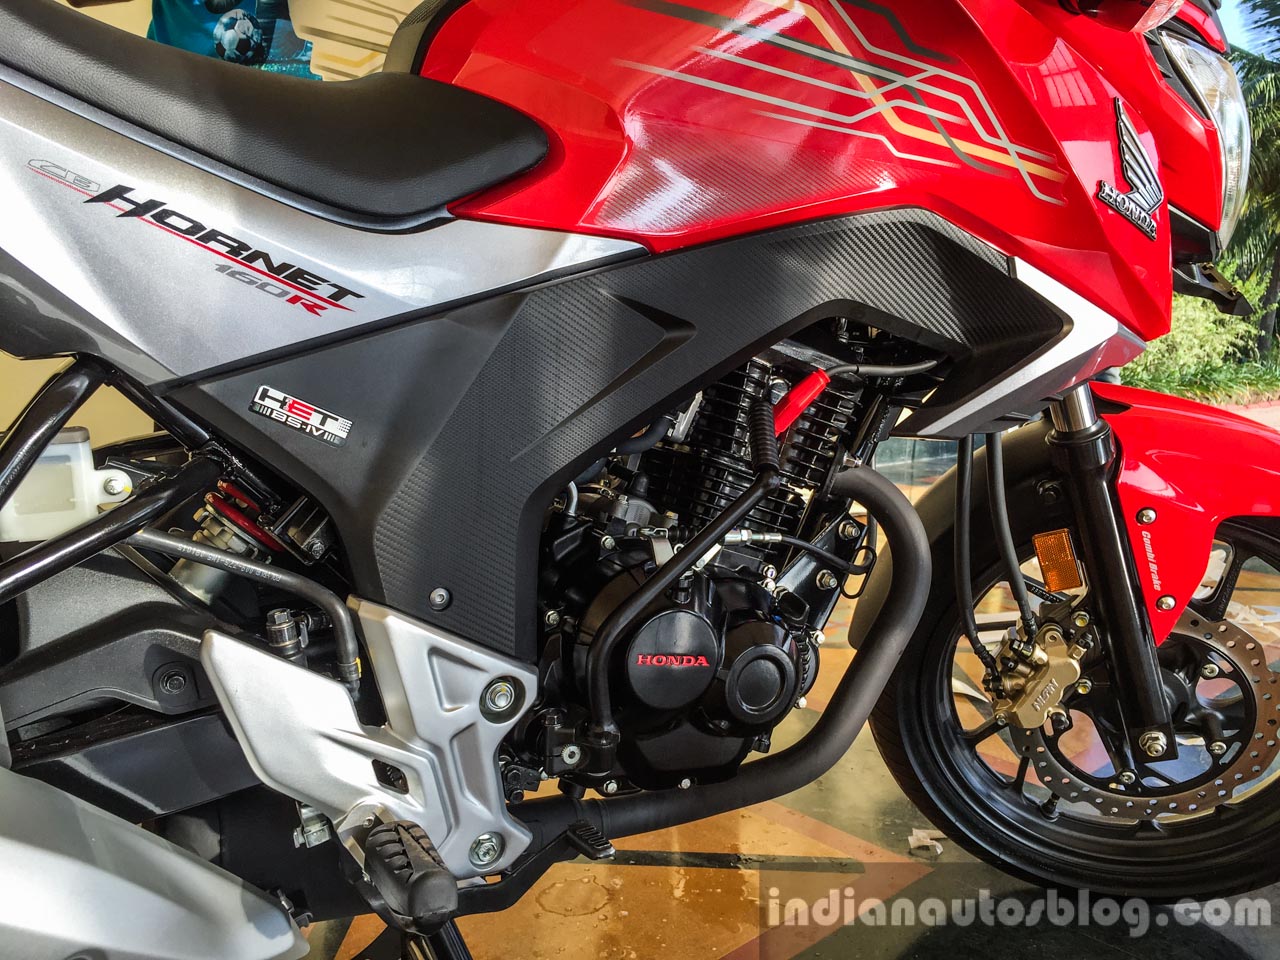 Honda Cb Hornet 160r Launched At Inr 79 900